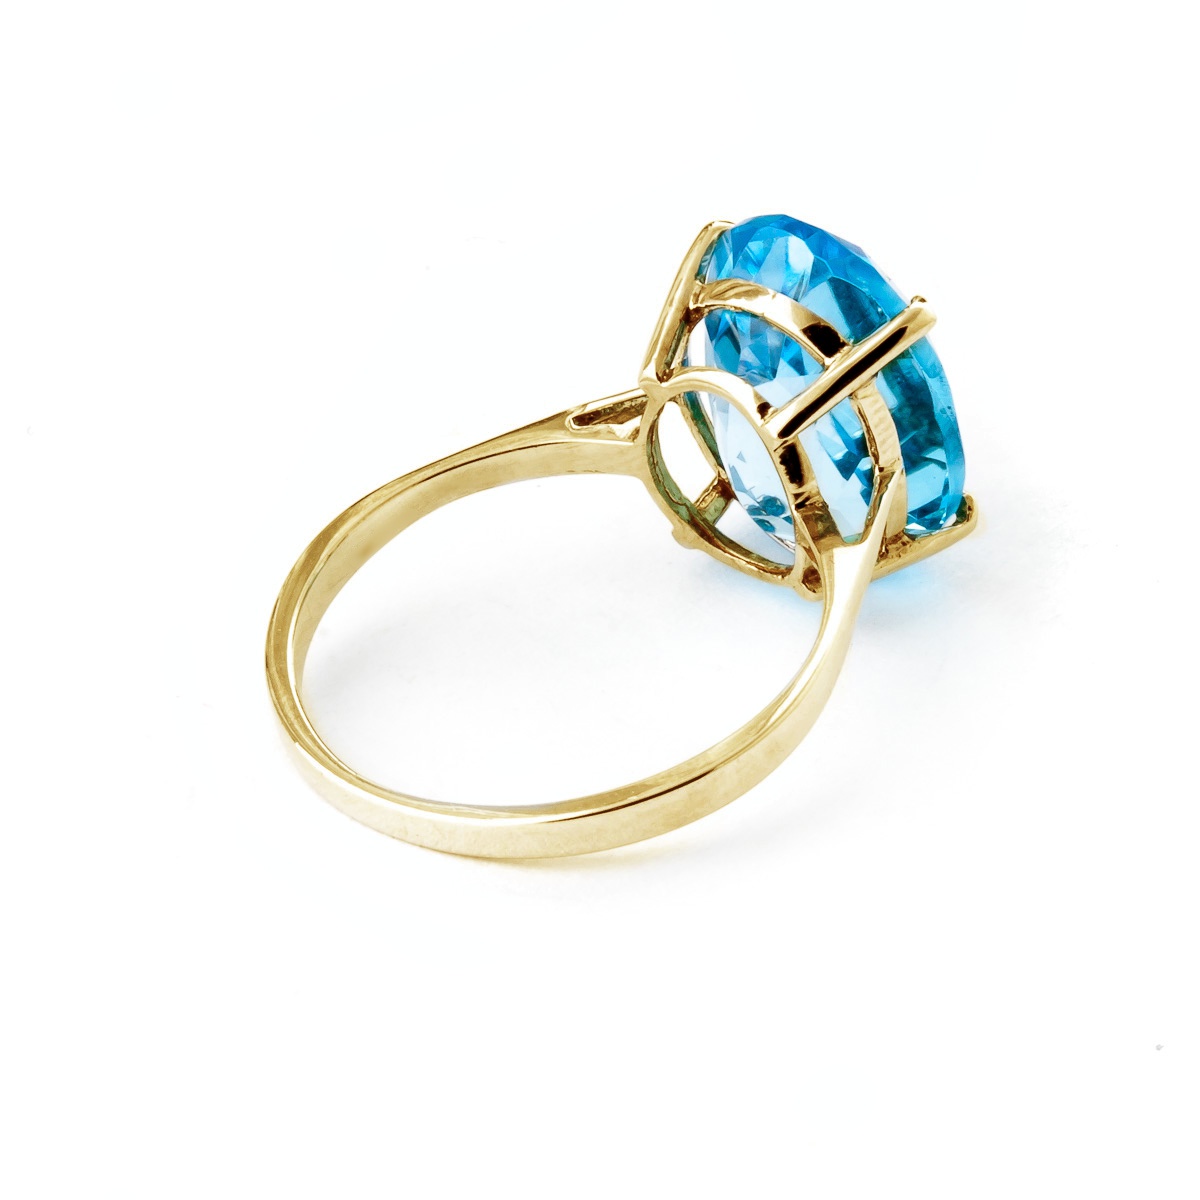 Galaxy Gold 14k High Polished Solid Yellow Gold Ring 8 Carat Natural Oval Blue Topaz (6.5) - image 3 of 5